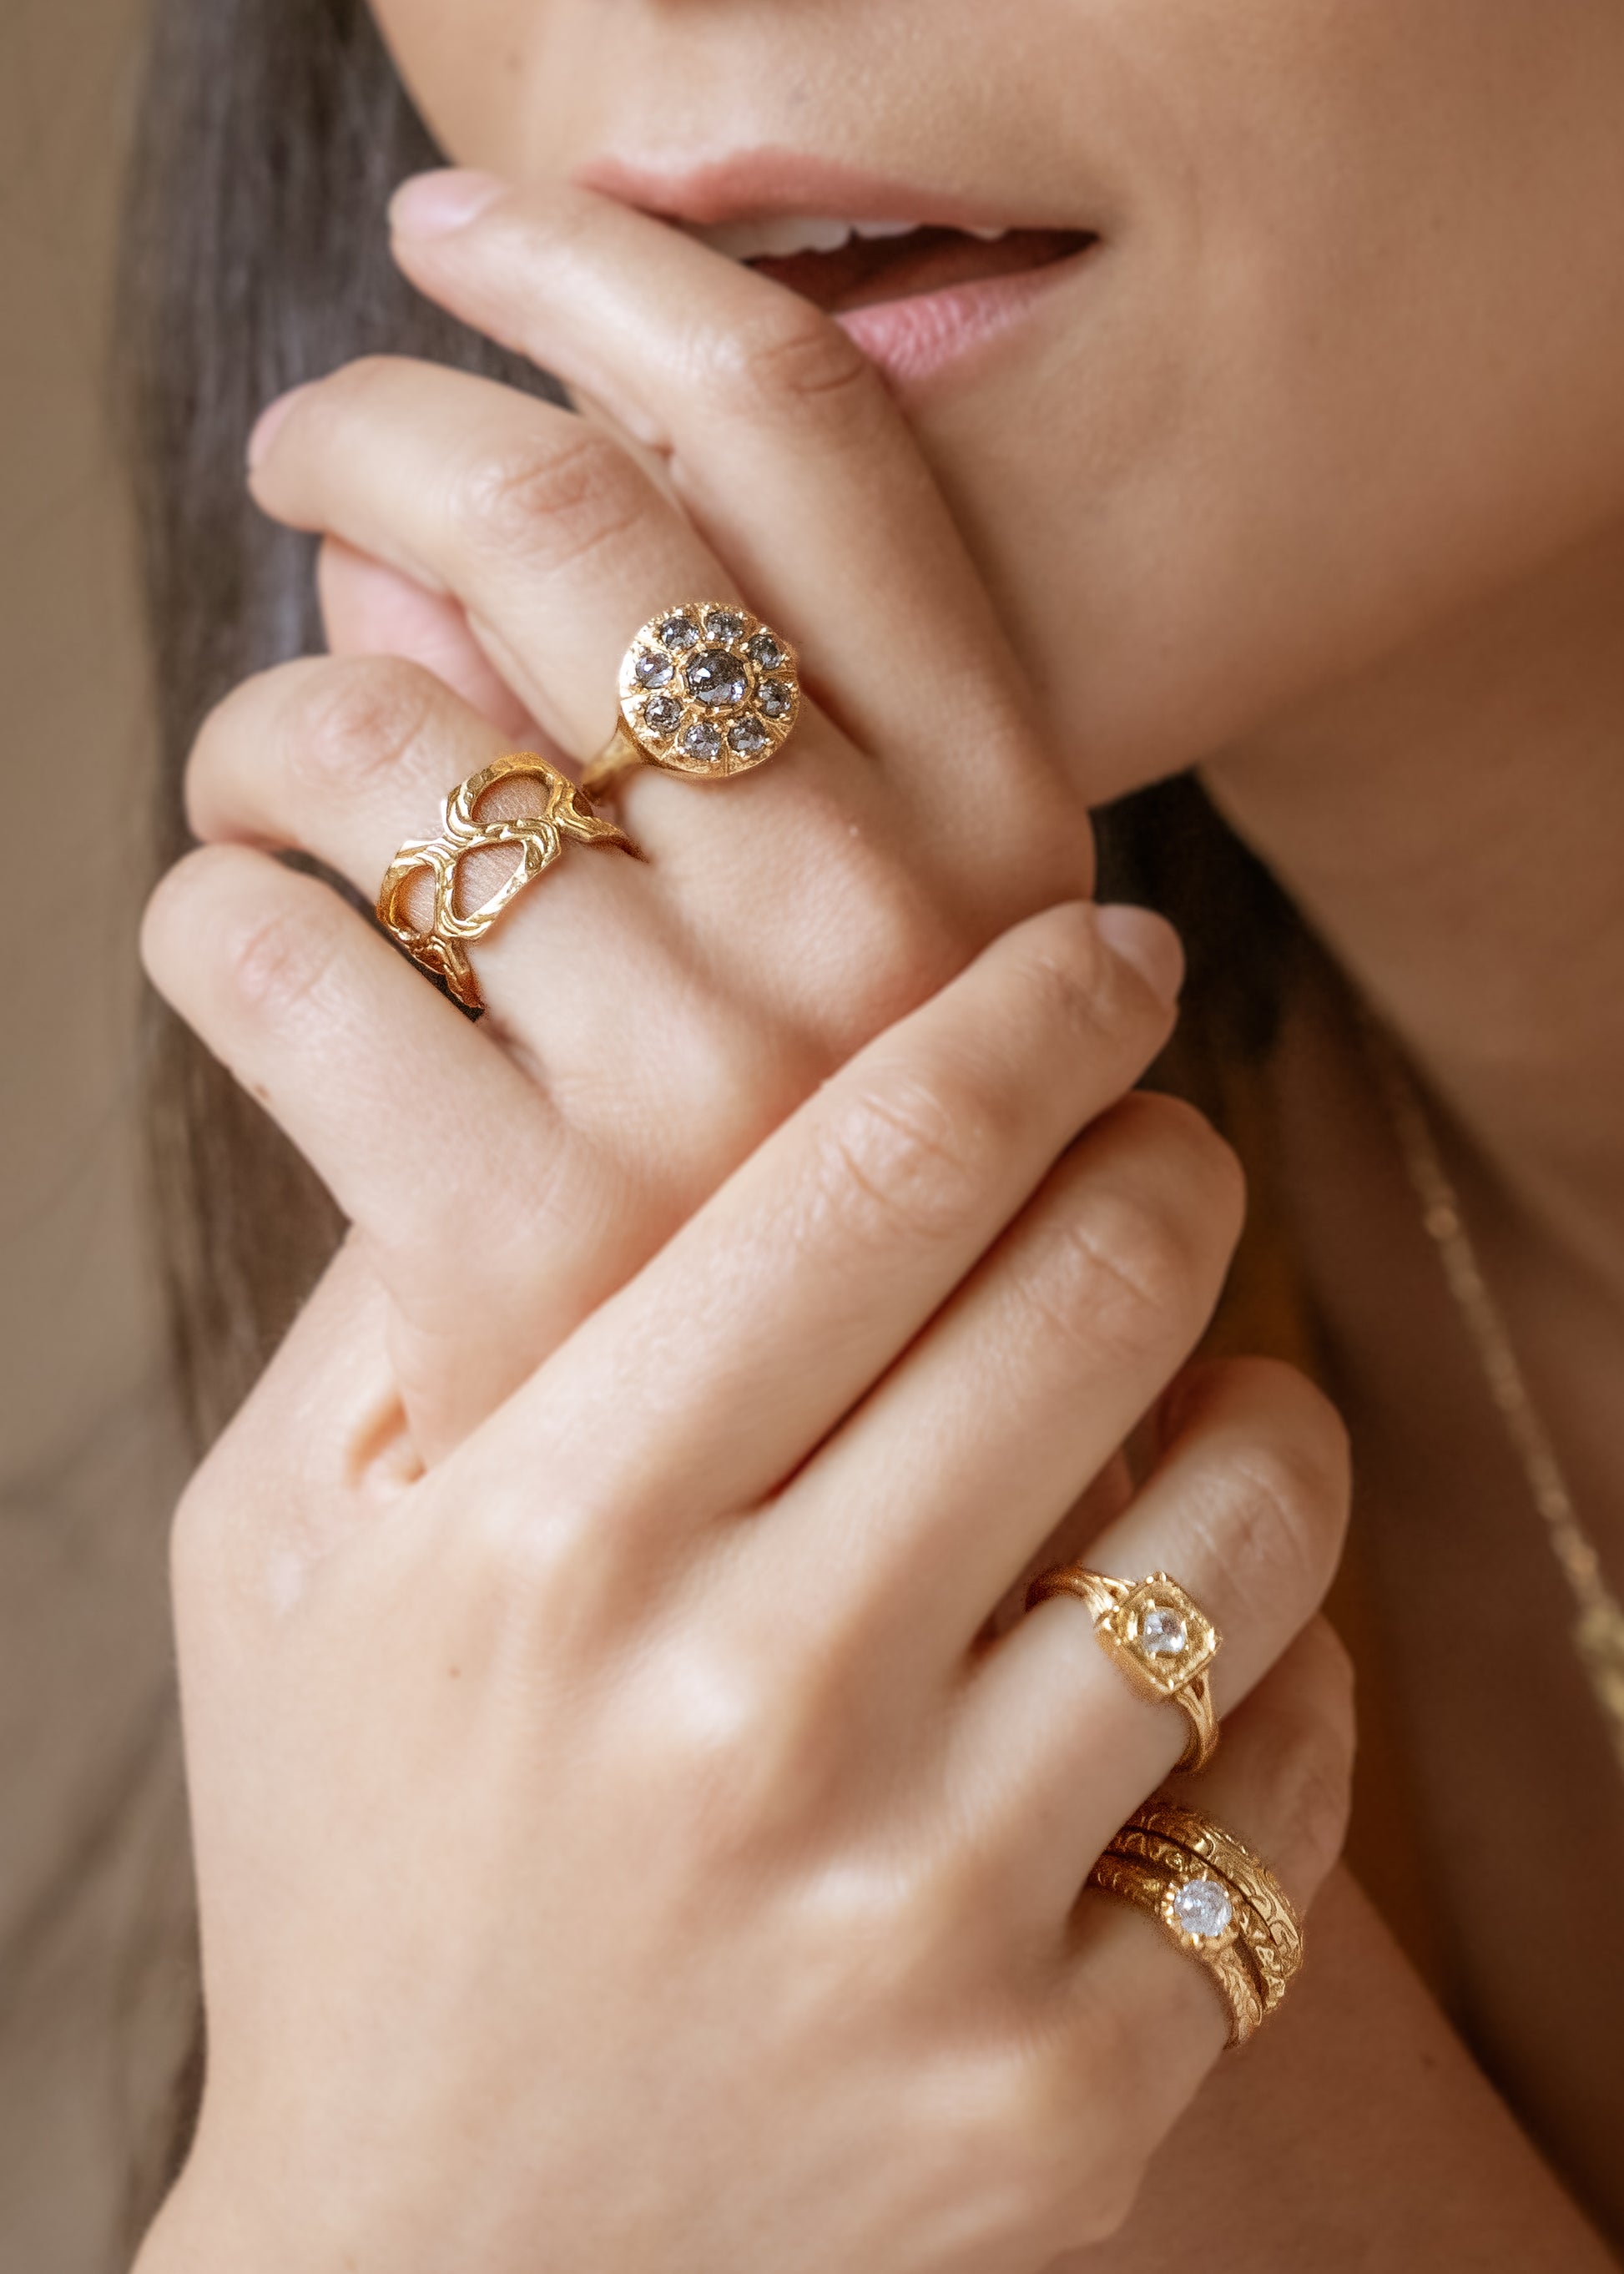 Conjuring the haunted cobblestone streets of the historic town for which it is named, the Salem ring weaves open spaces with textured gold to create a wide band for everyday wear—a bold and eye-catching piece of metalwork.